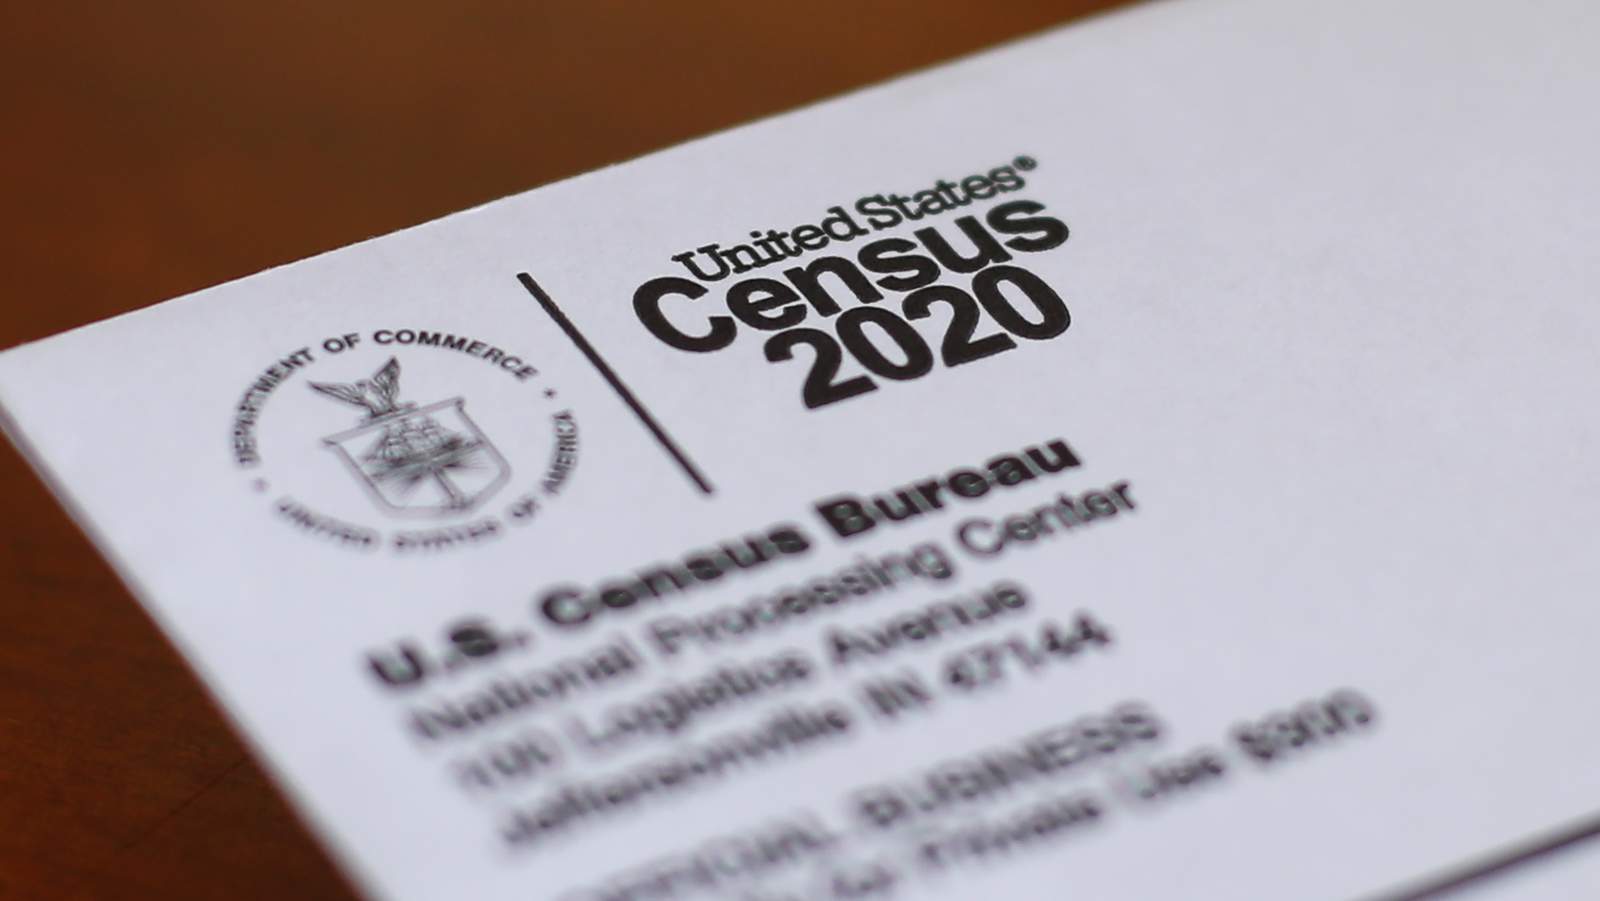 With deadline looming, group wants more census documents